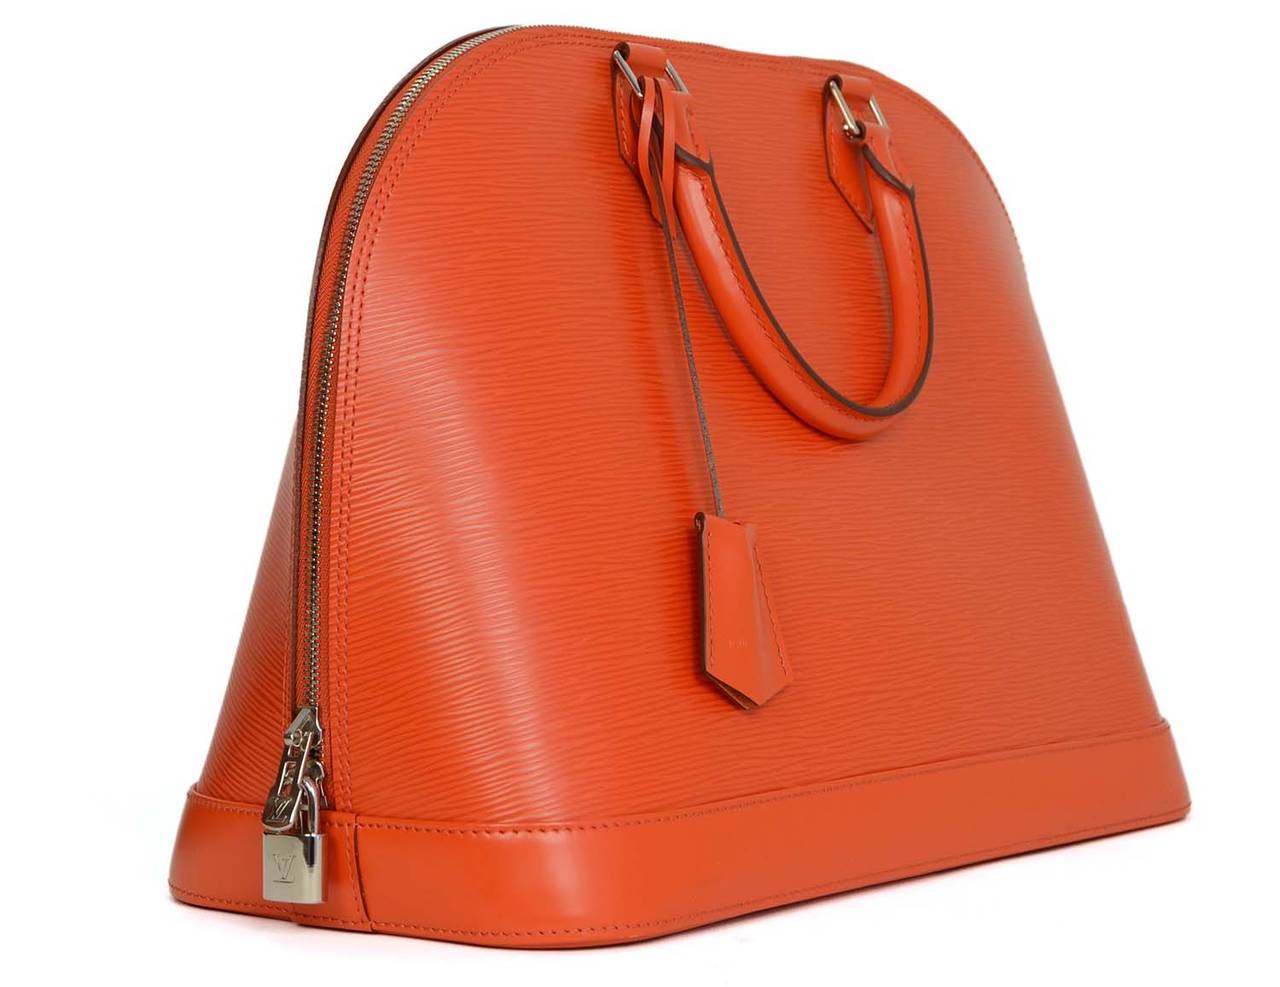 Louis Vuitton Orange Epi Alma GM Bag
Made in: France
Year of Production: 2012
Color: Orange
Hardware: Silvertone
Materials: Epi leather and metal
Lining: Orange suede
Closure/opening: Zip around closure
Exterior Pockets: None
Interior